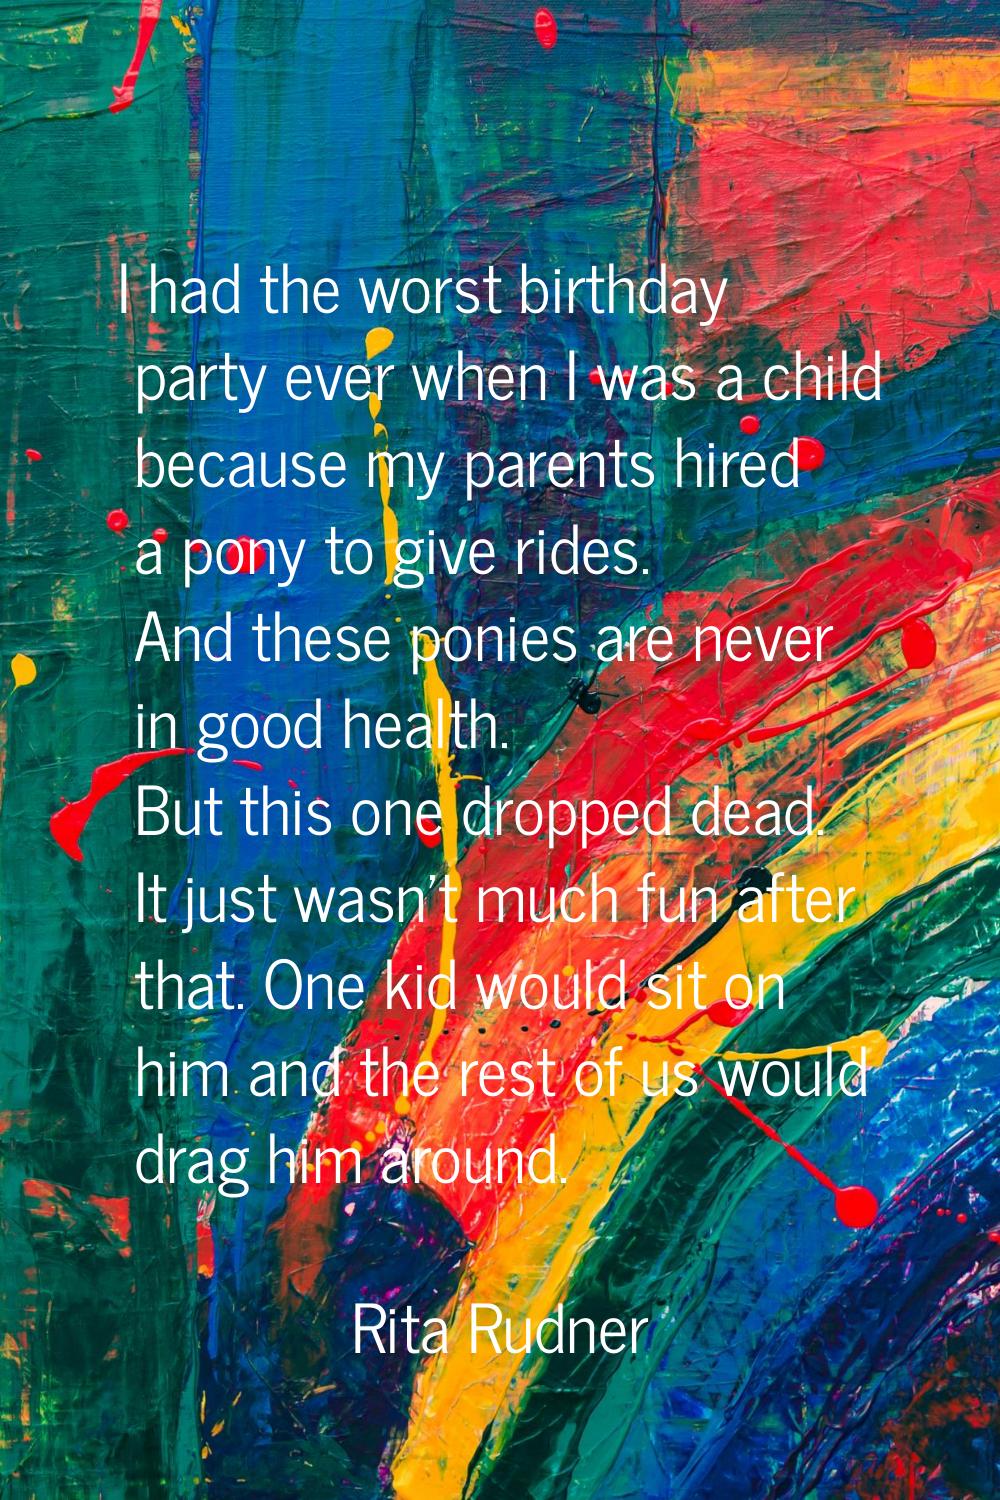 I had the worst birthday party ever when I was a child because my parents hired a pony to give ride